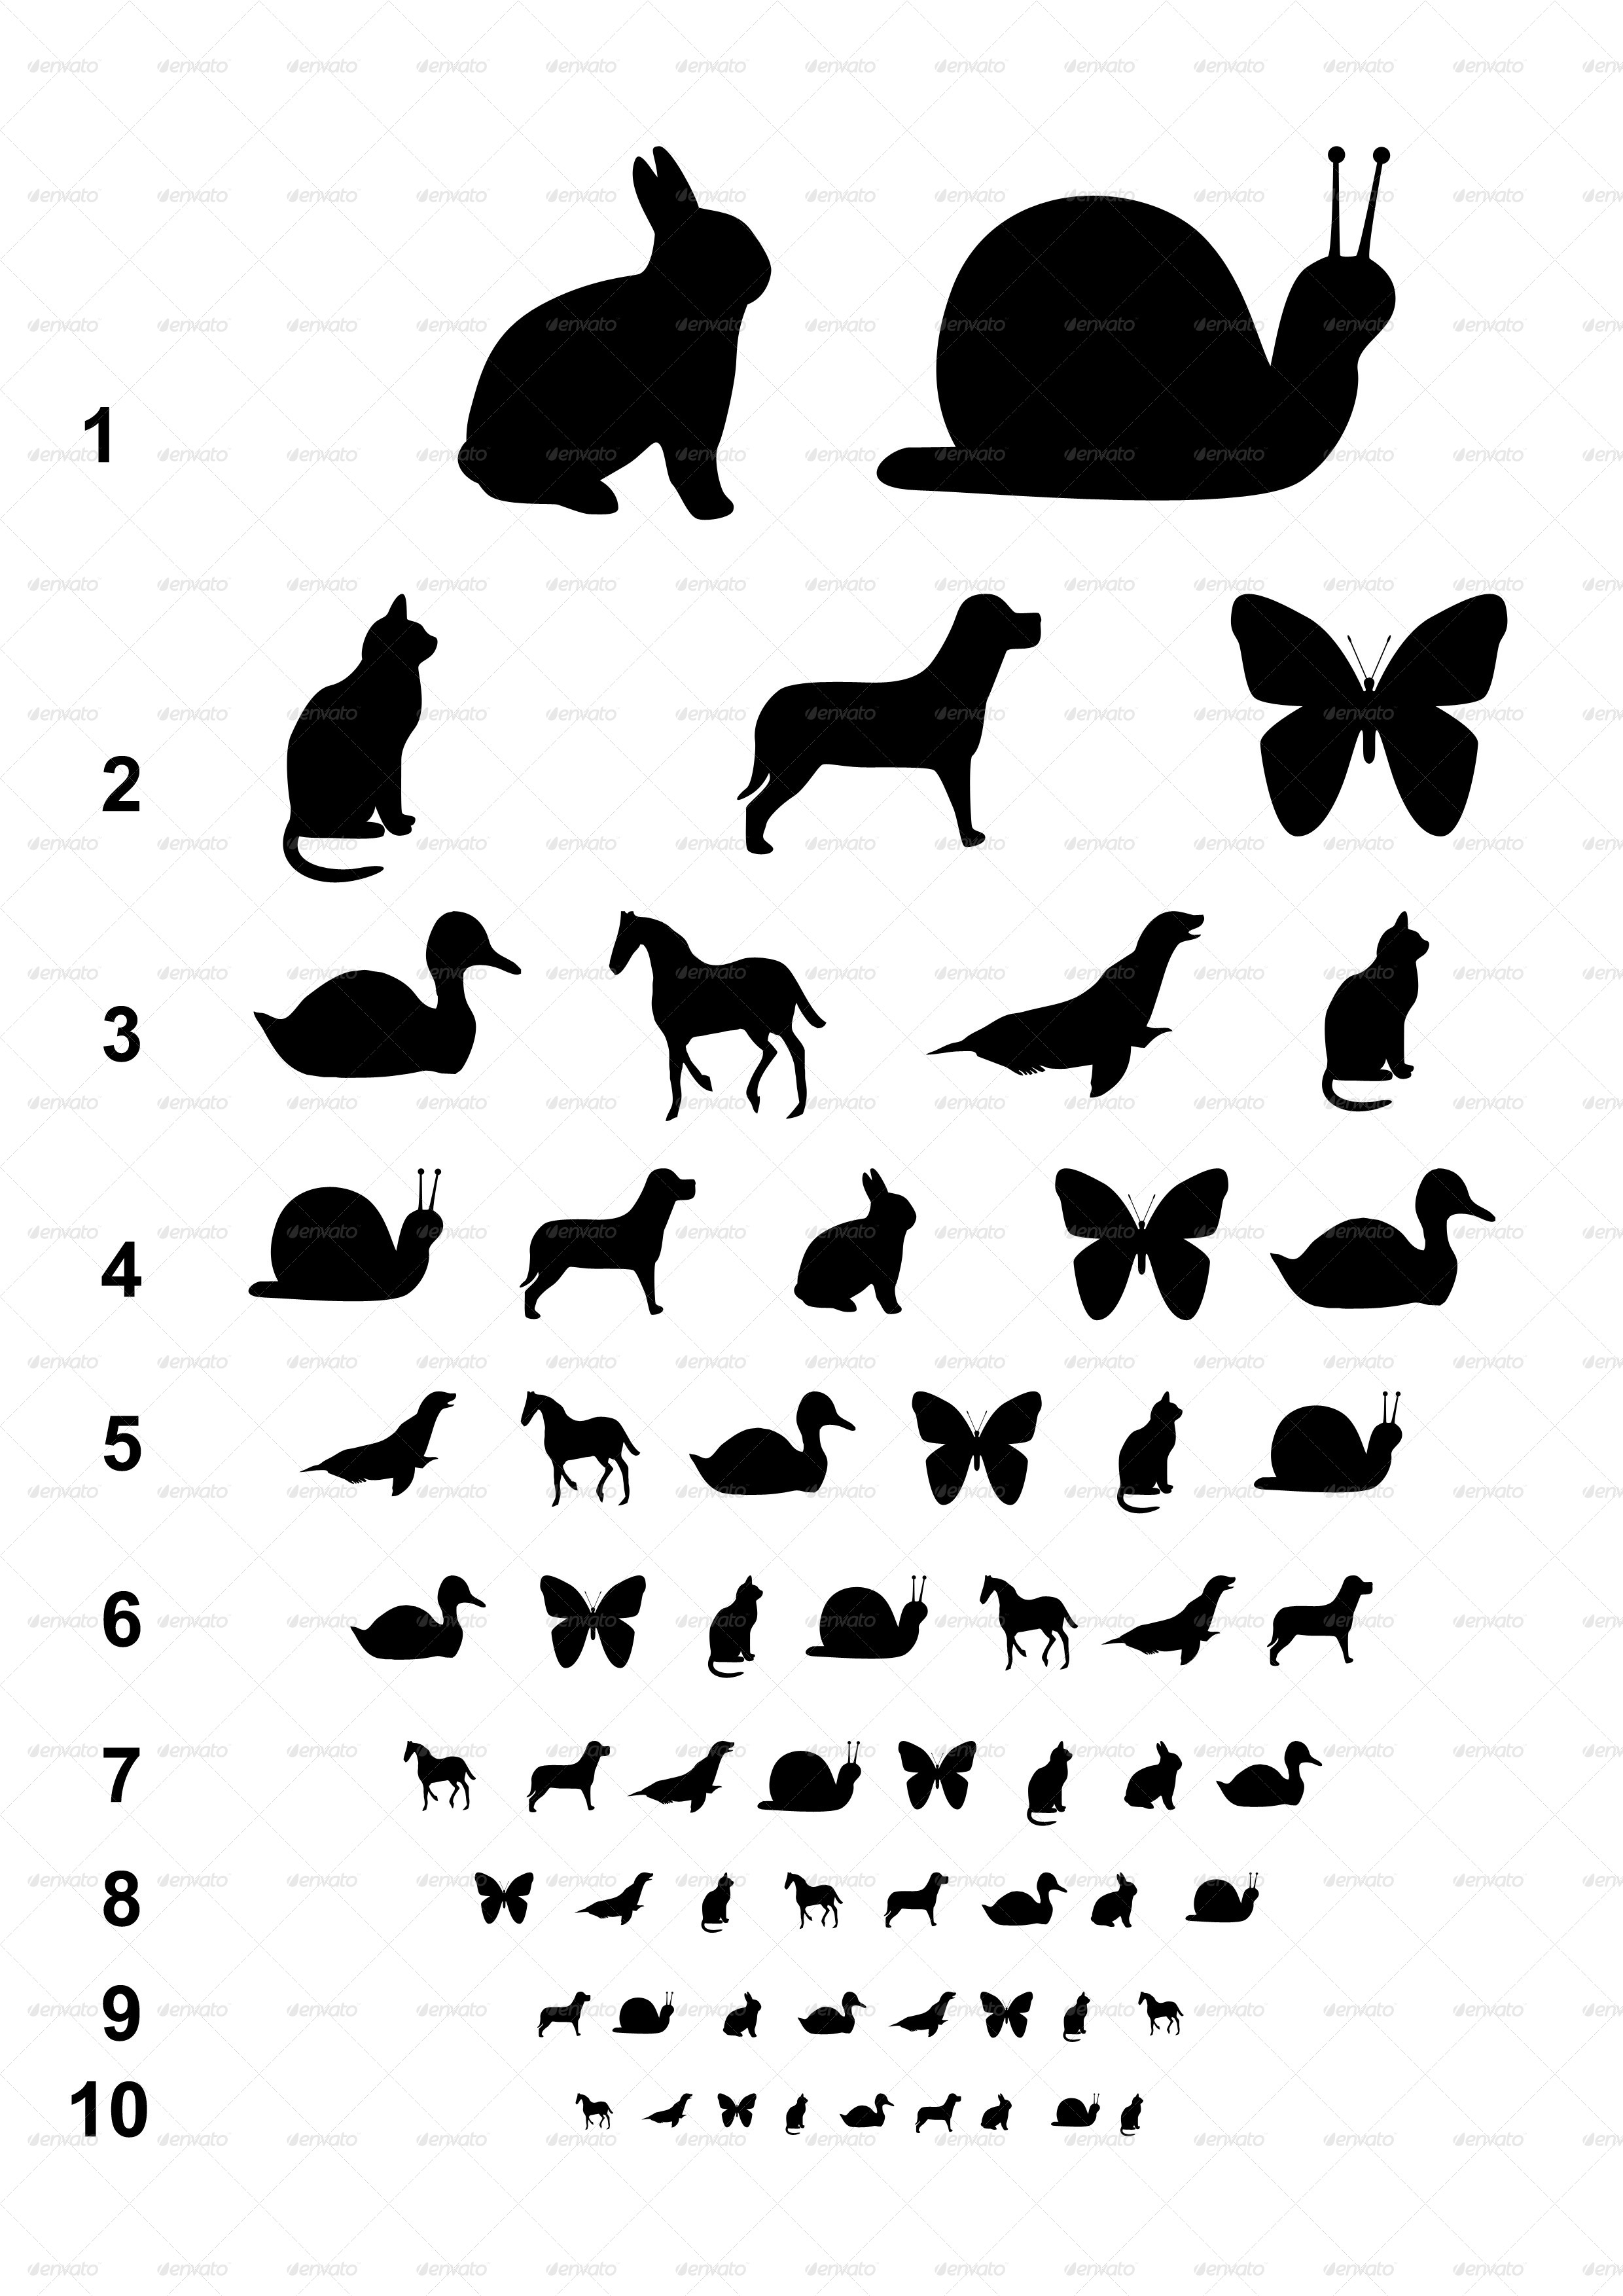 visual eye charts with animals for kids by fotografkagabriela